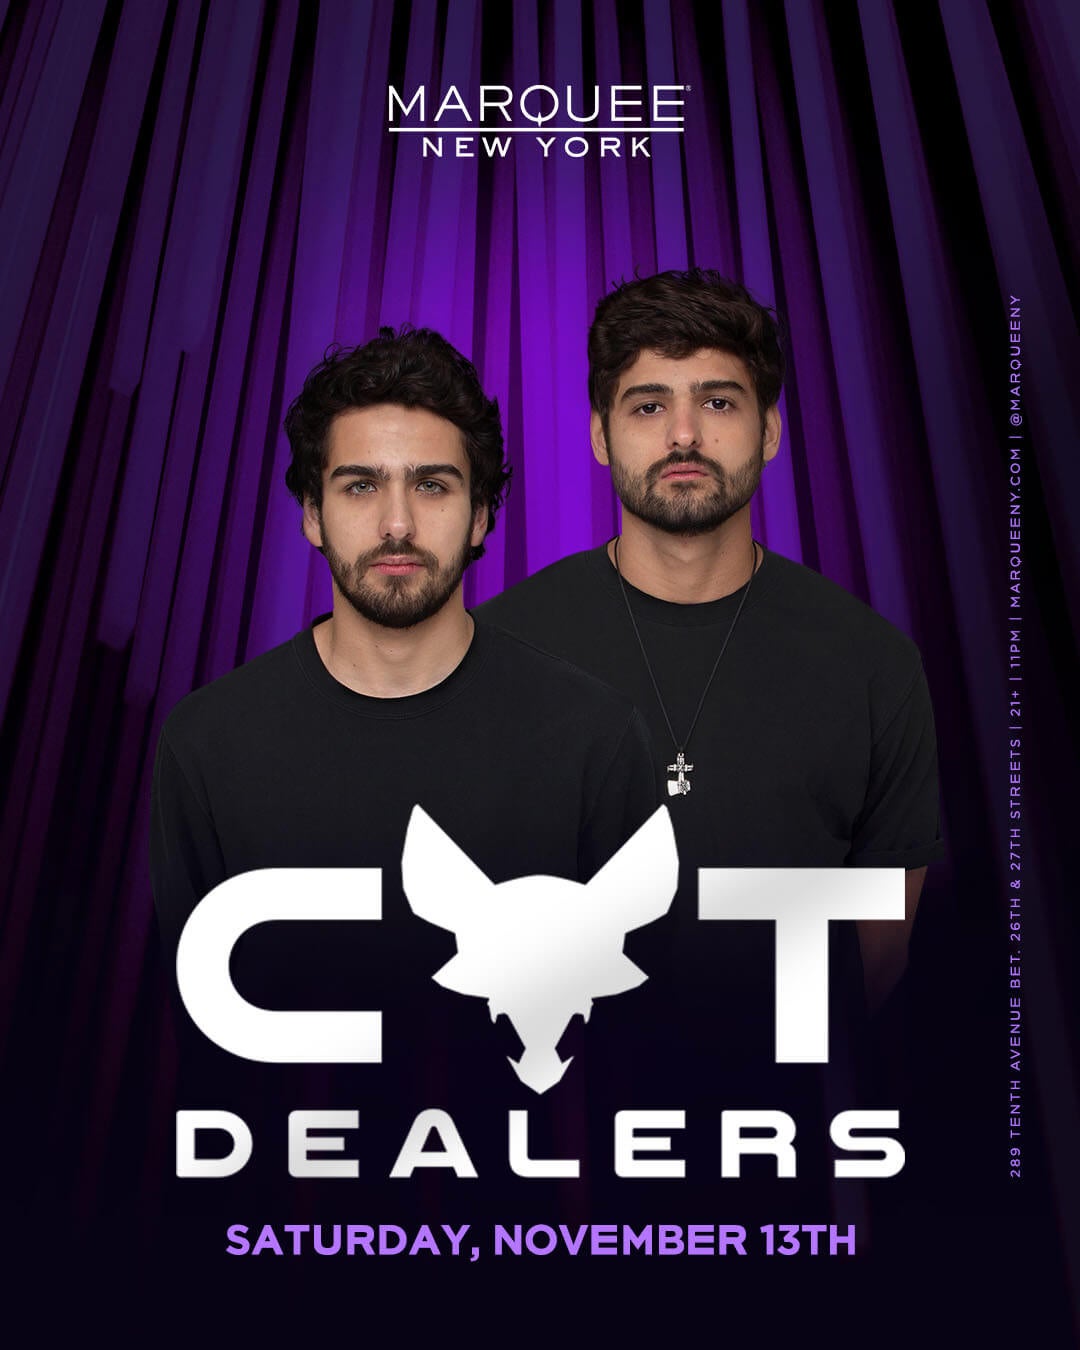 11/13/21 Cat Dealers Marquee New York